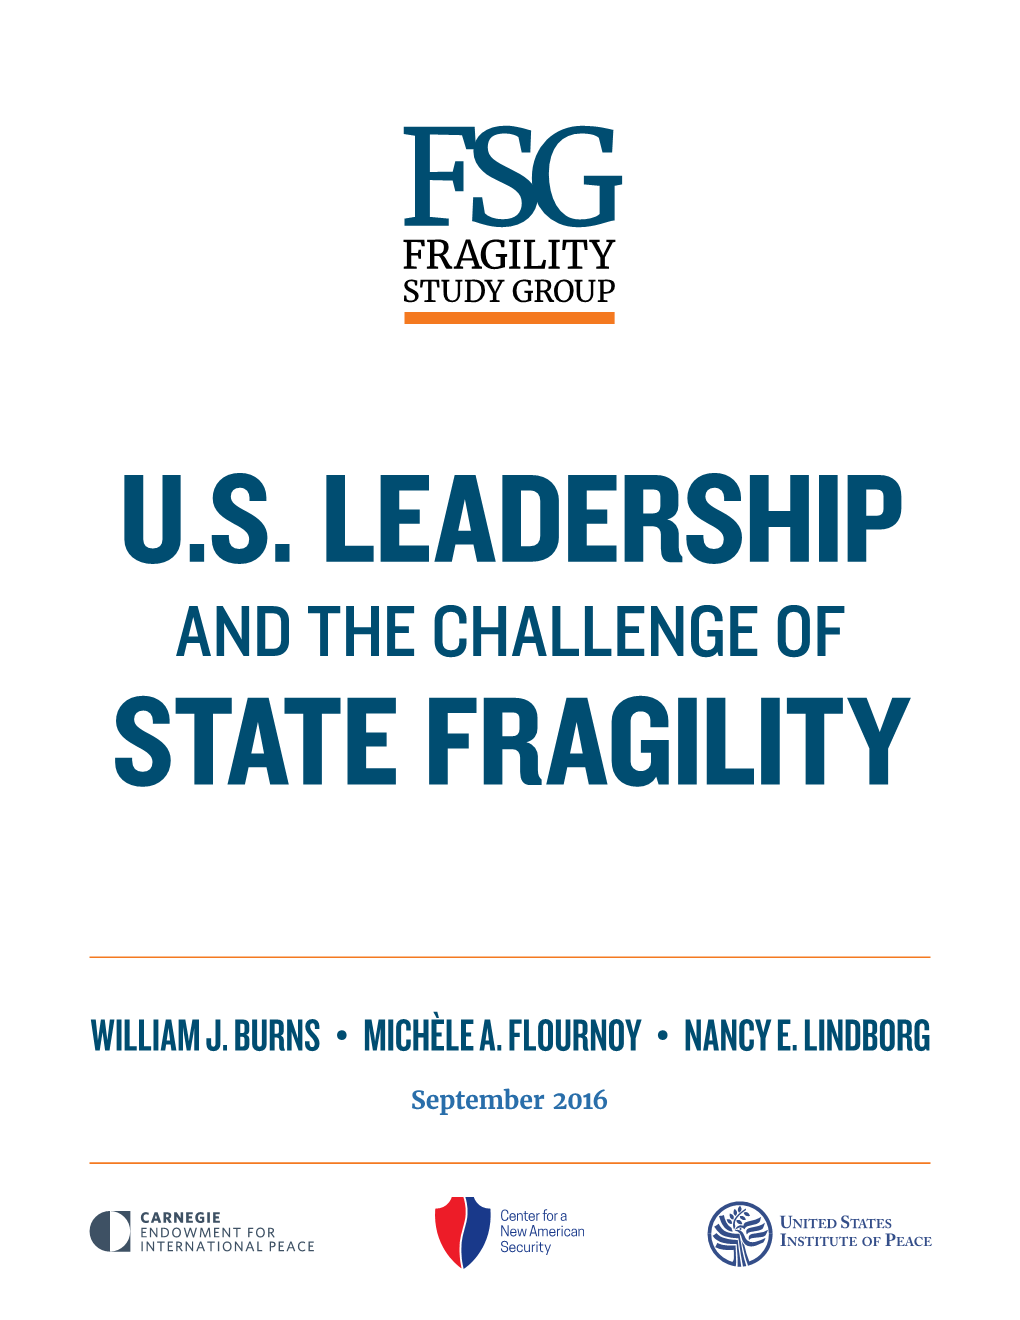 U.S. Leadership and the Challenge of State Fragility